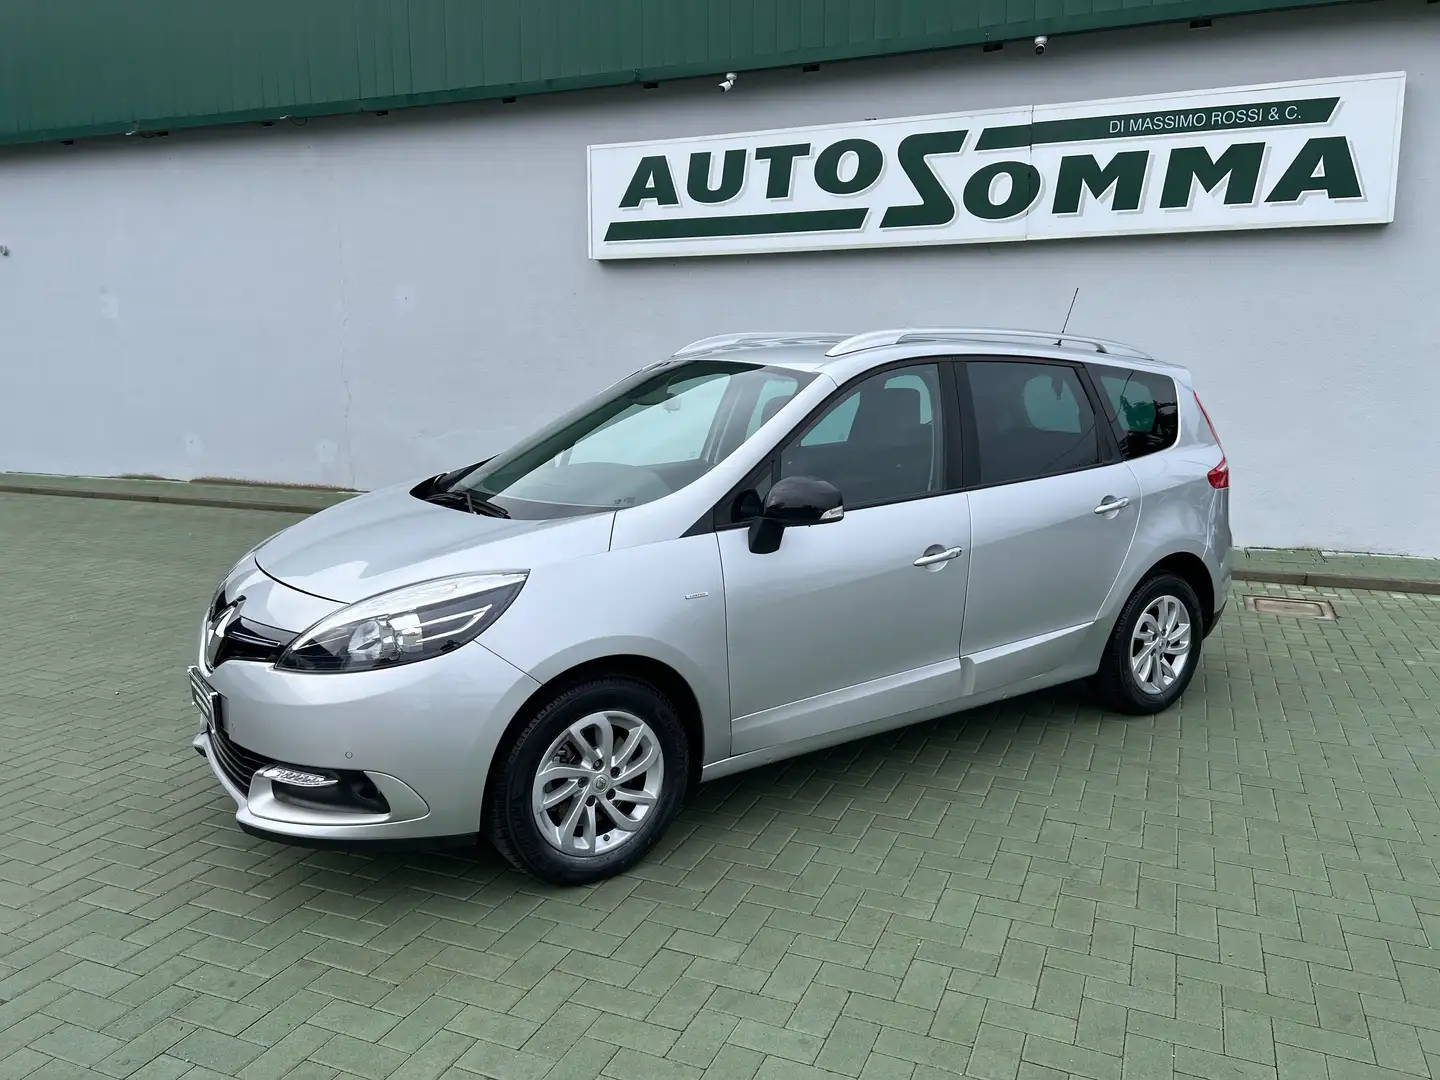 Renault Scenic 1.5 dci Limited  SOLI 18000 KM!! INTROVABILE!! Argent - 1